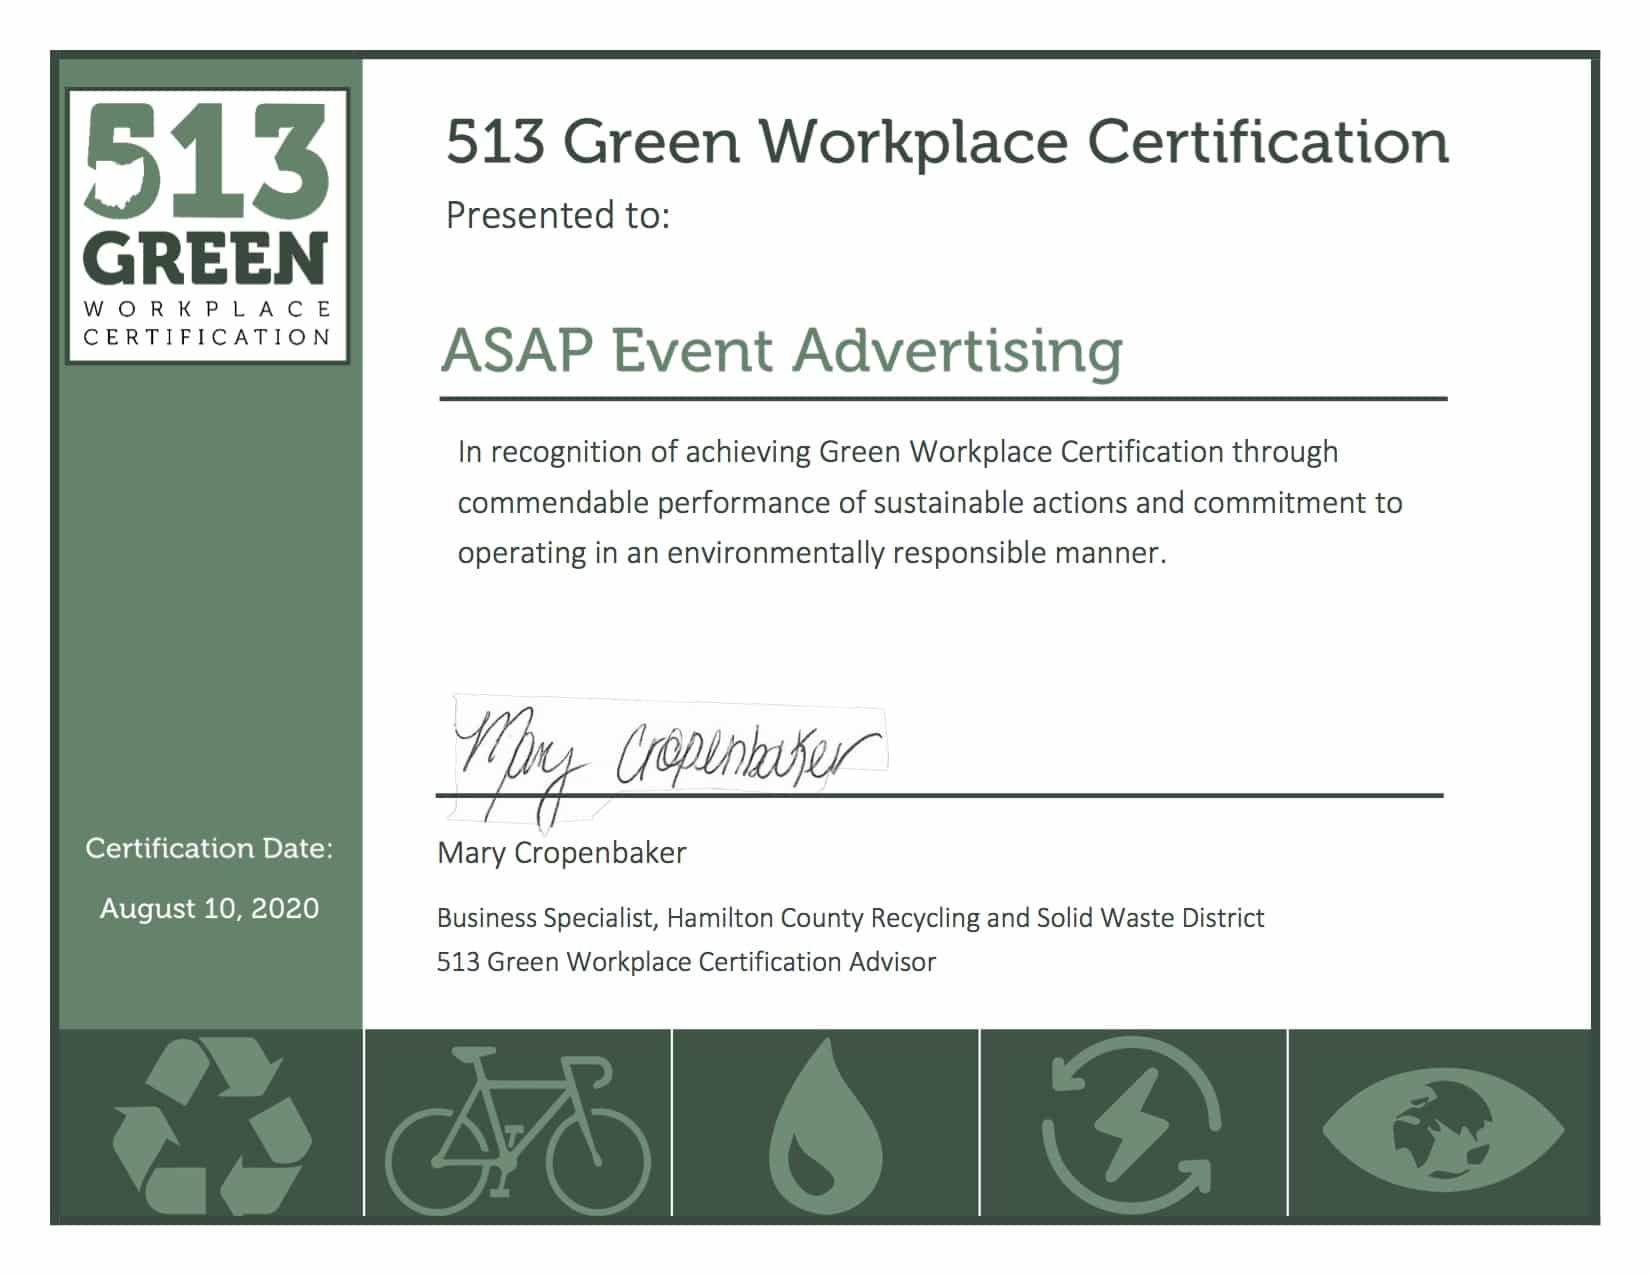 ASAP is now proud to be 513 Green Workplace Certified! 